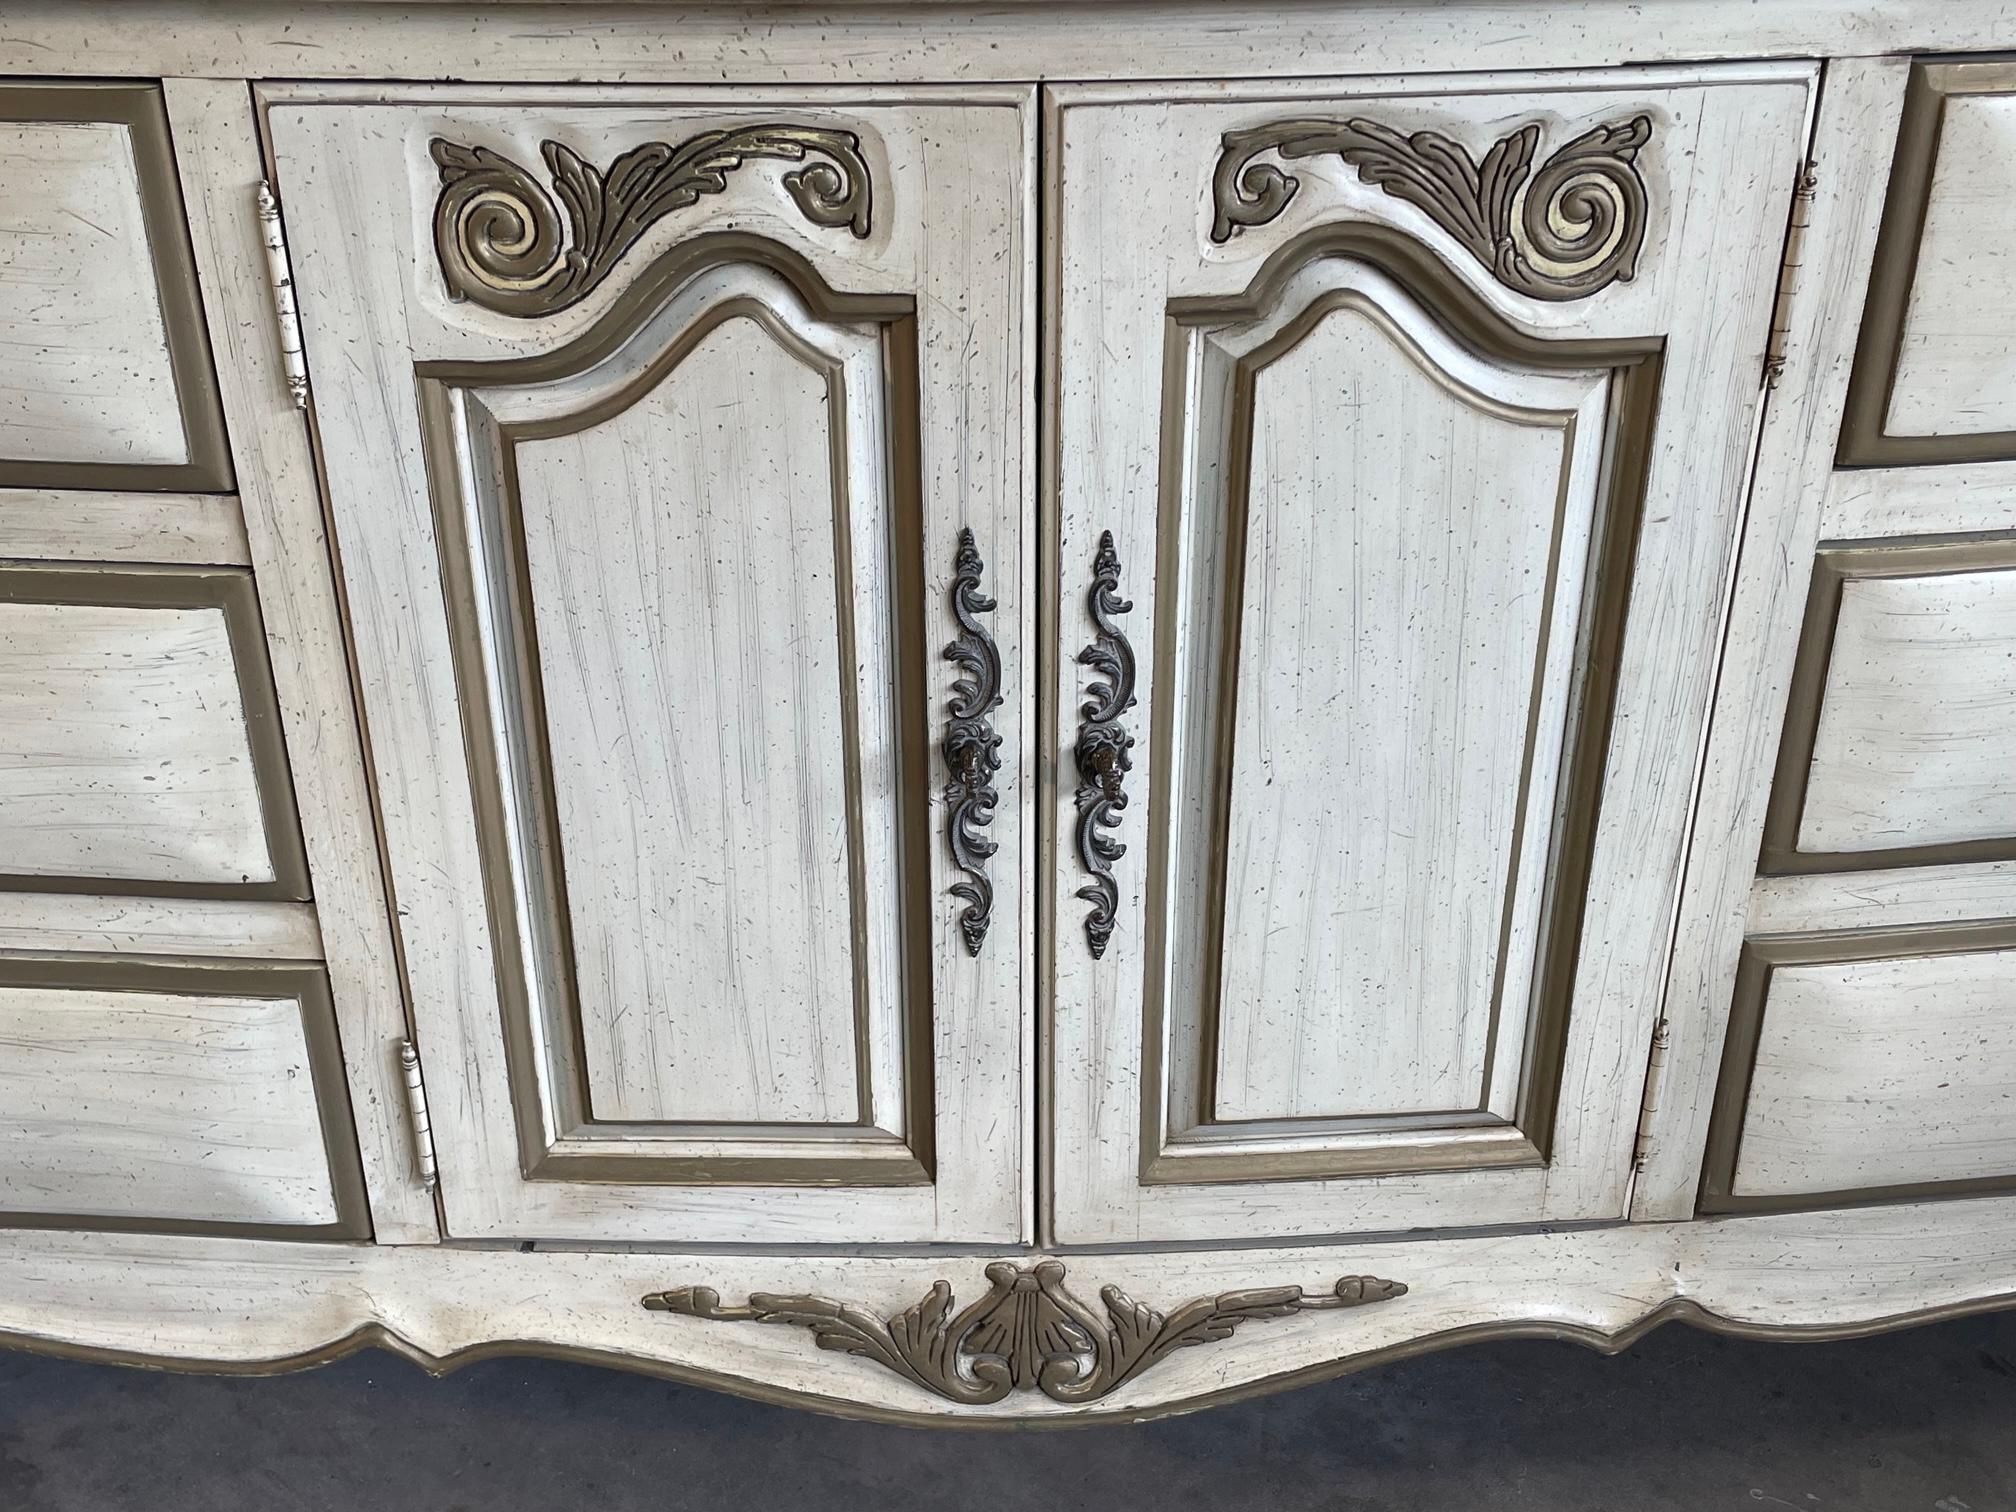 French Provincial Bombe Dresser by White Furniture In Good Condition For Sale In Jacksonville, FL